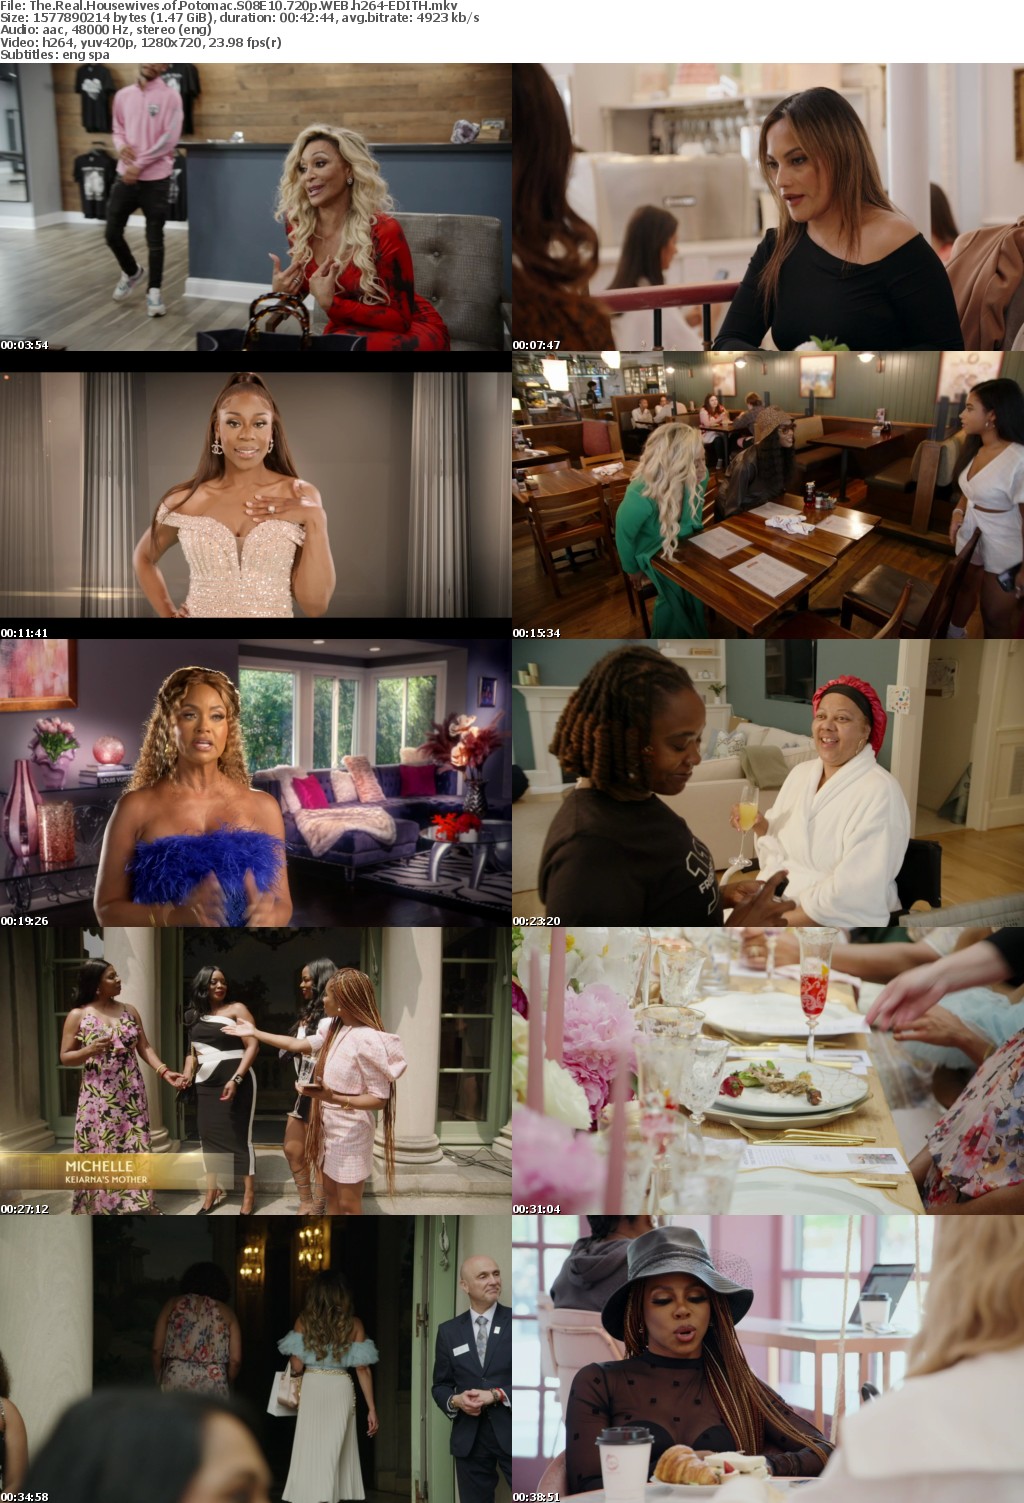 The Real Housewives of Potomac S08E10 720p WEB h264-EDITH